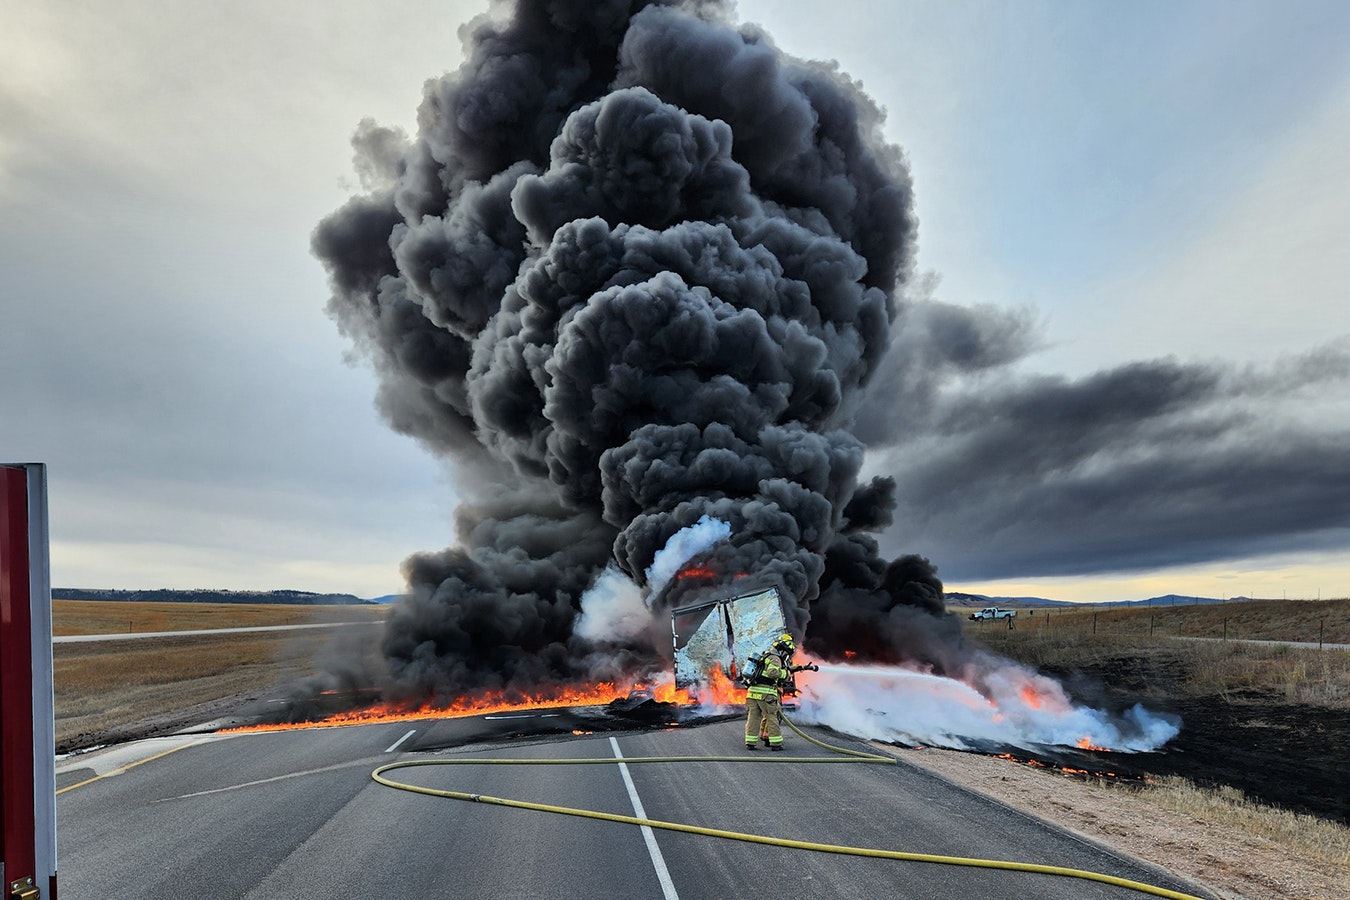 Fire crews from Crook County, Wyoming, and Spearfish, South Dakota, worked together to put out this semitrailer fire on Interstate 90 near Beulah, Wyoming, close to the South Dakota border.